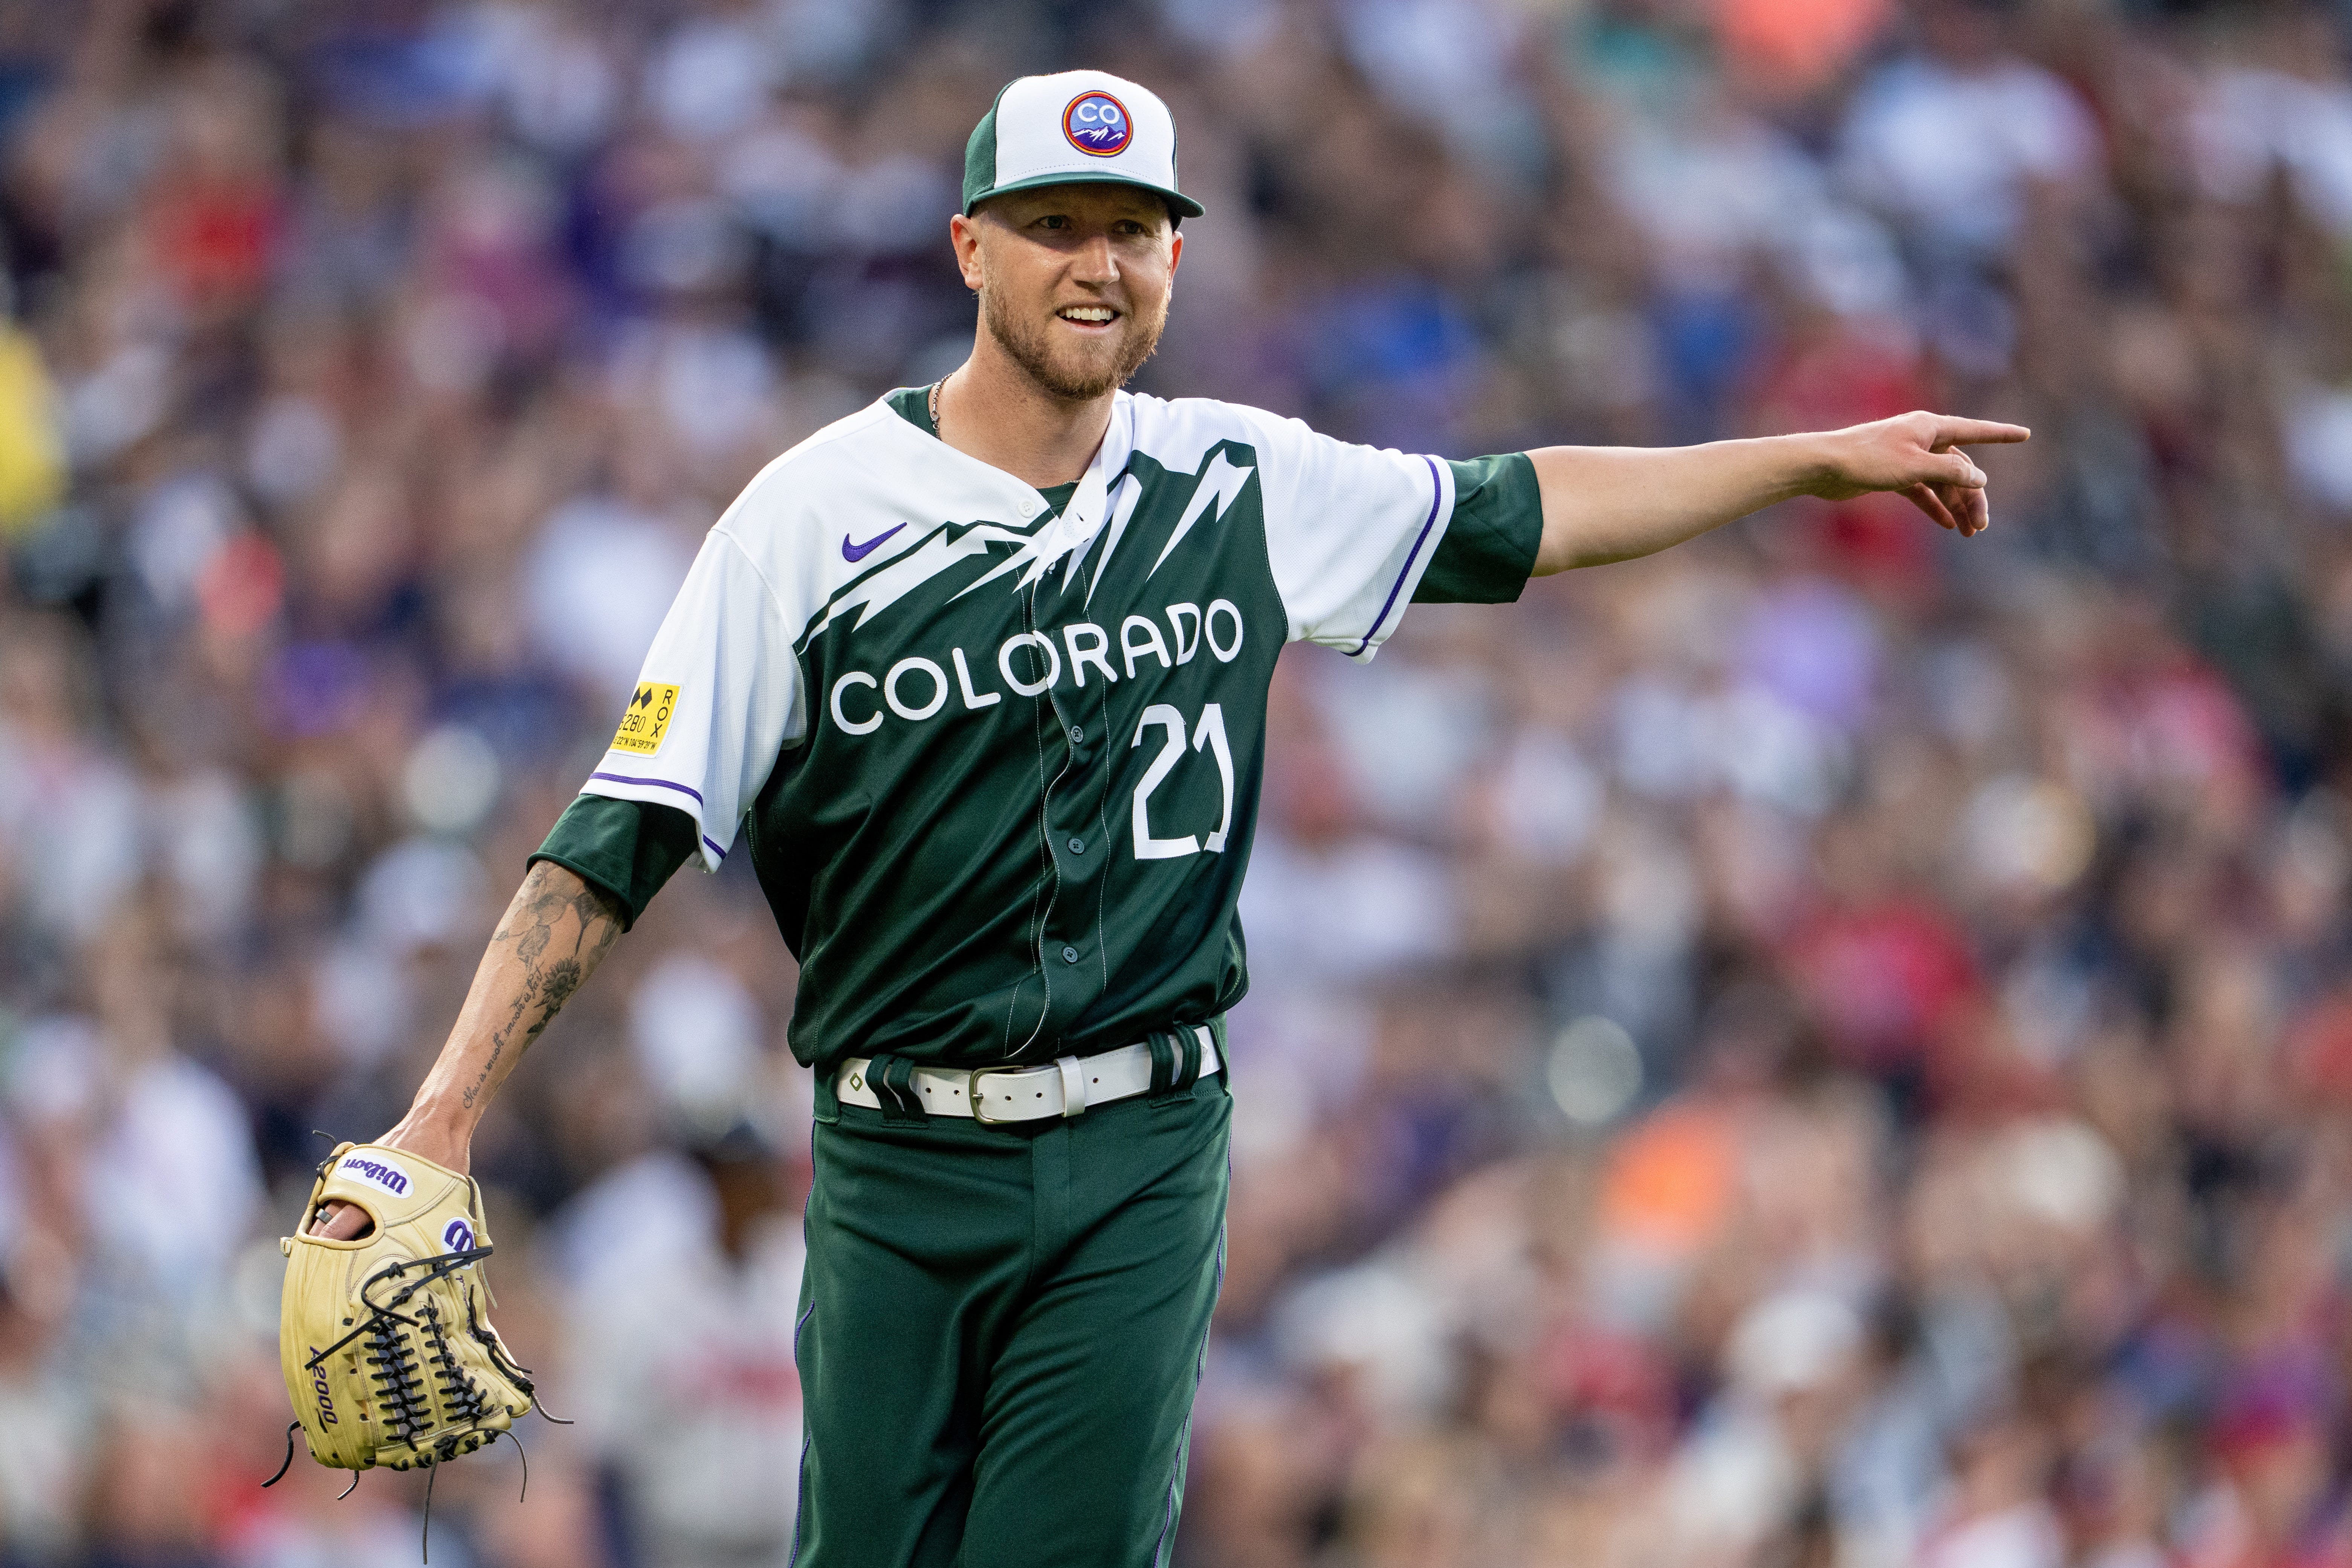 PHOTOS: Nike City Connect Uniforms Take The Field - Rockies Blog